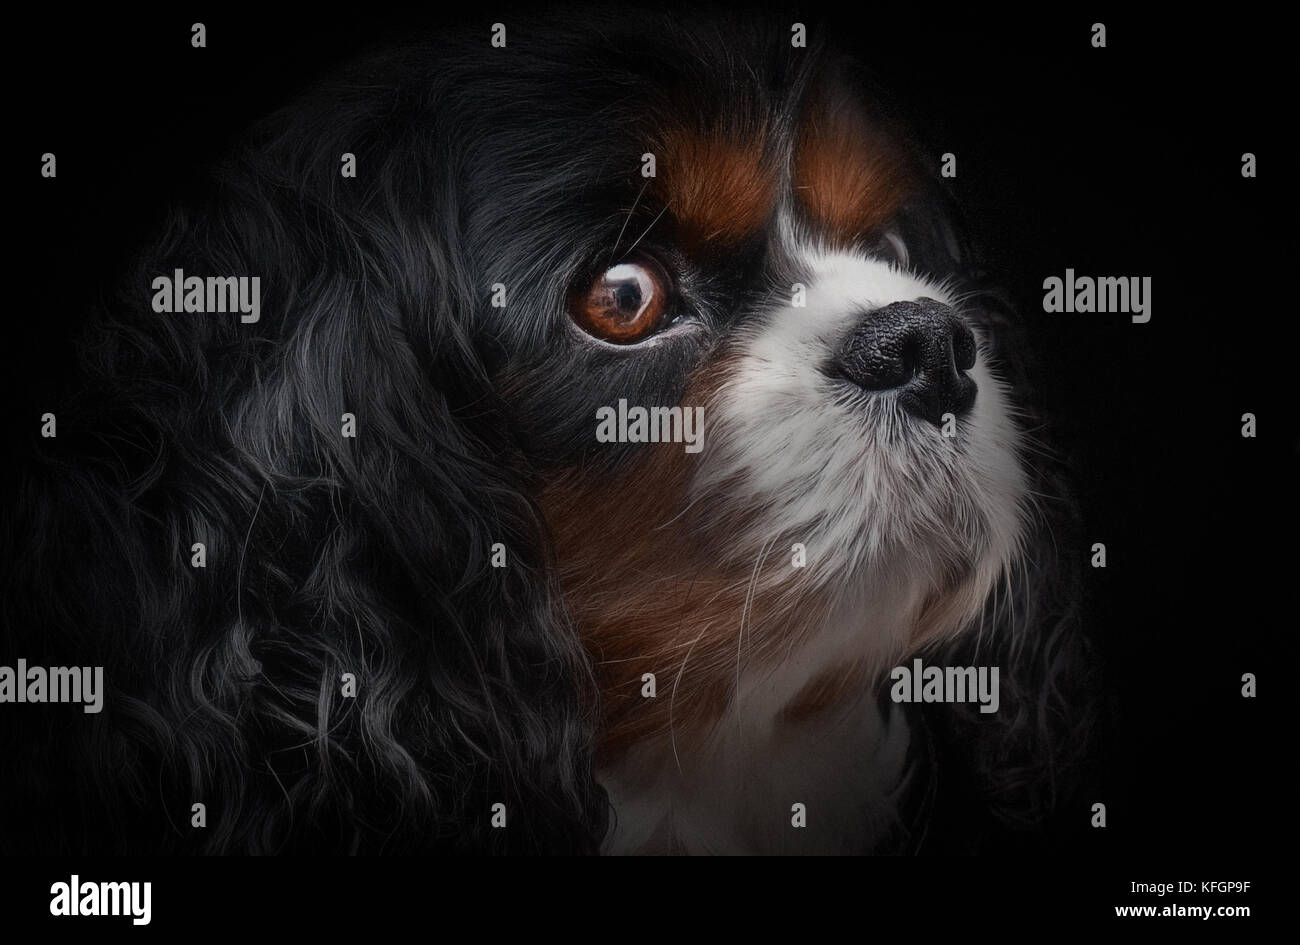 A cavalier king charles dog on a black background looking to the right Stock Photo